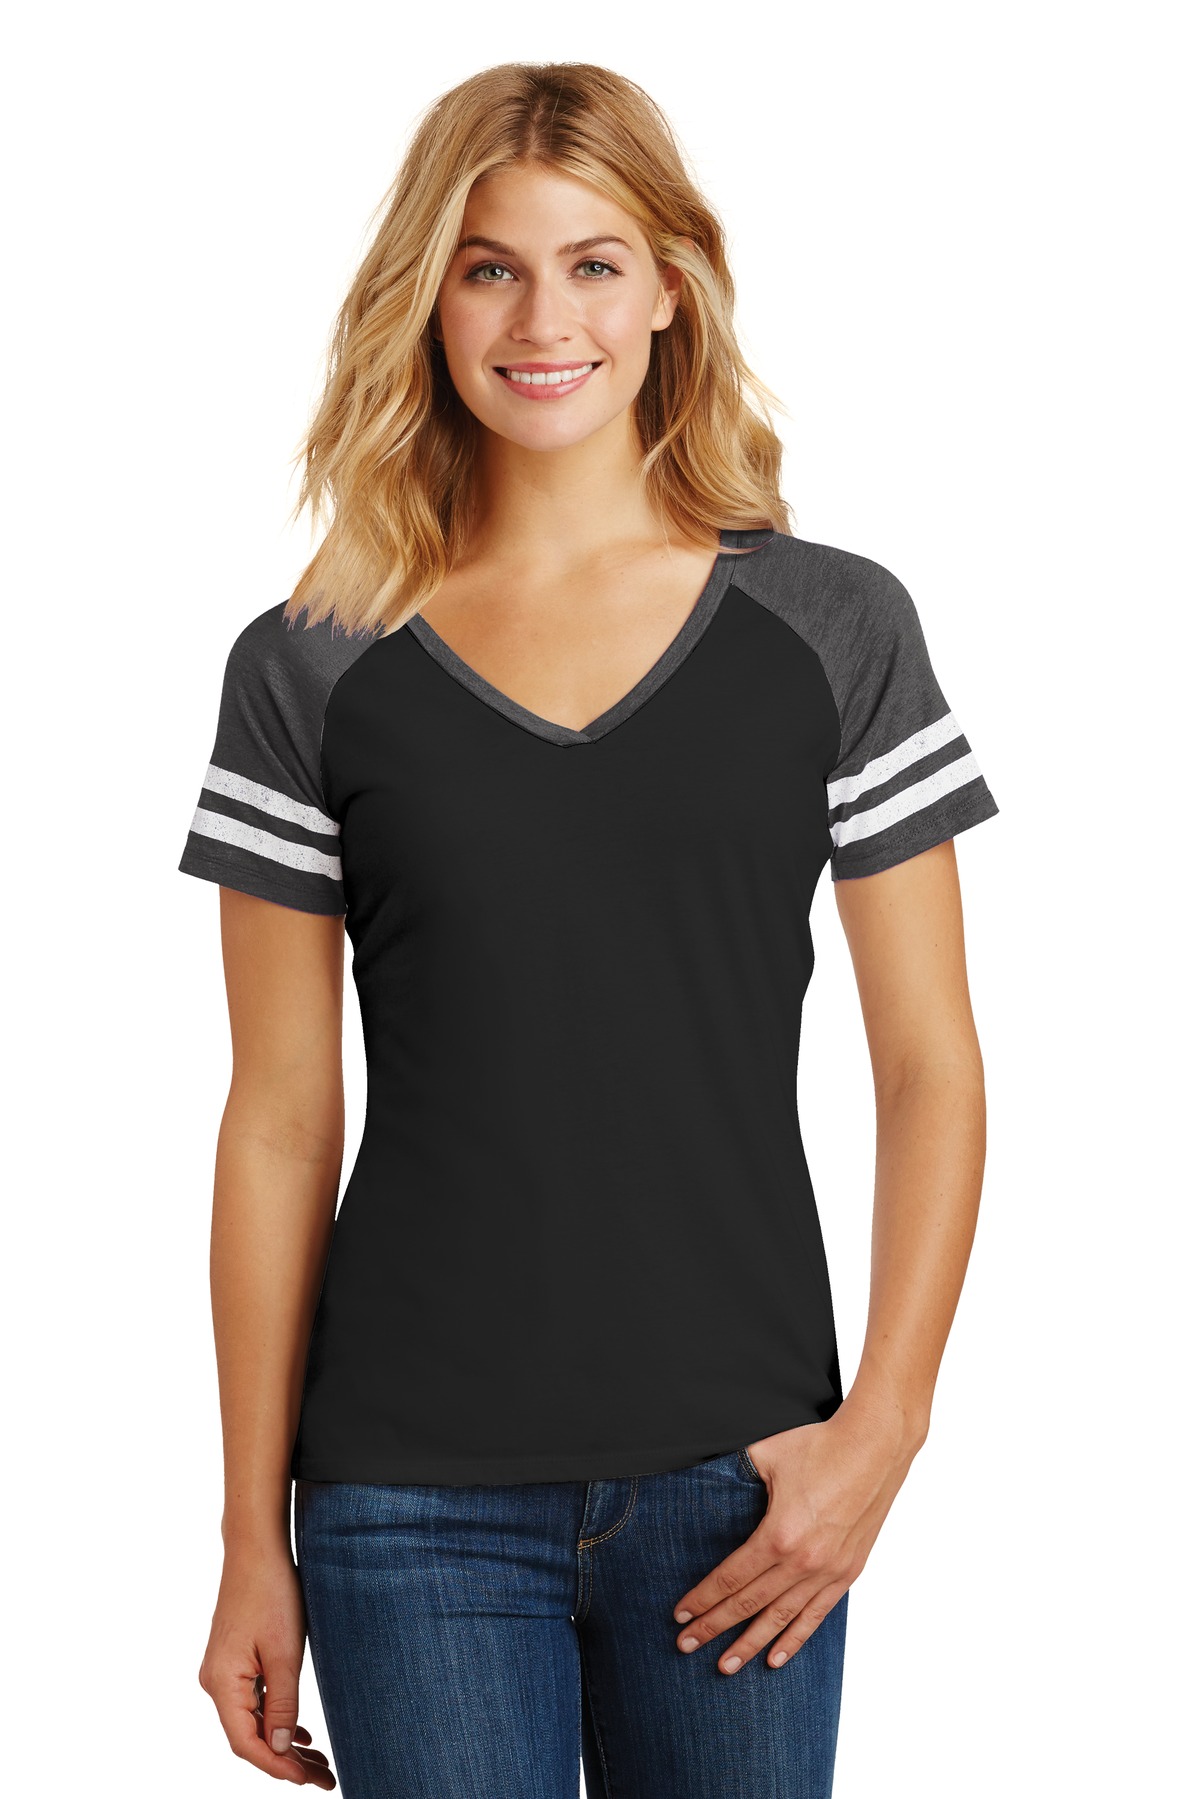 District Ladies Hospitality T-Shirts ® Womens Game V-Neck Tee.-District